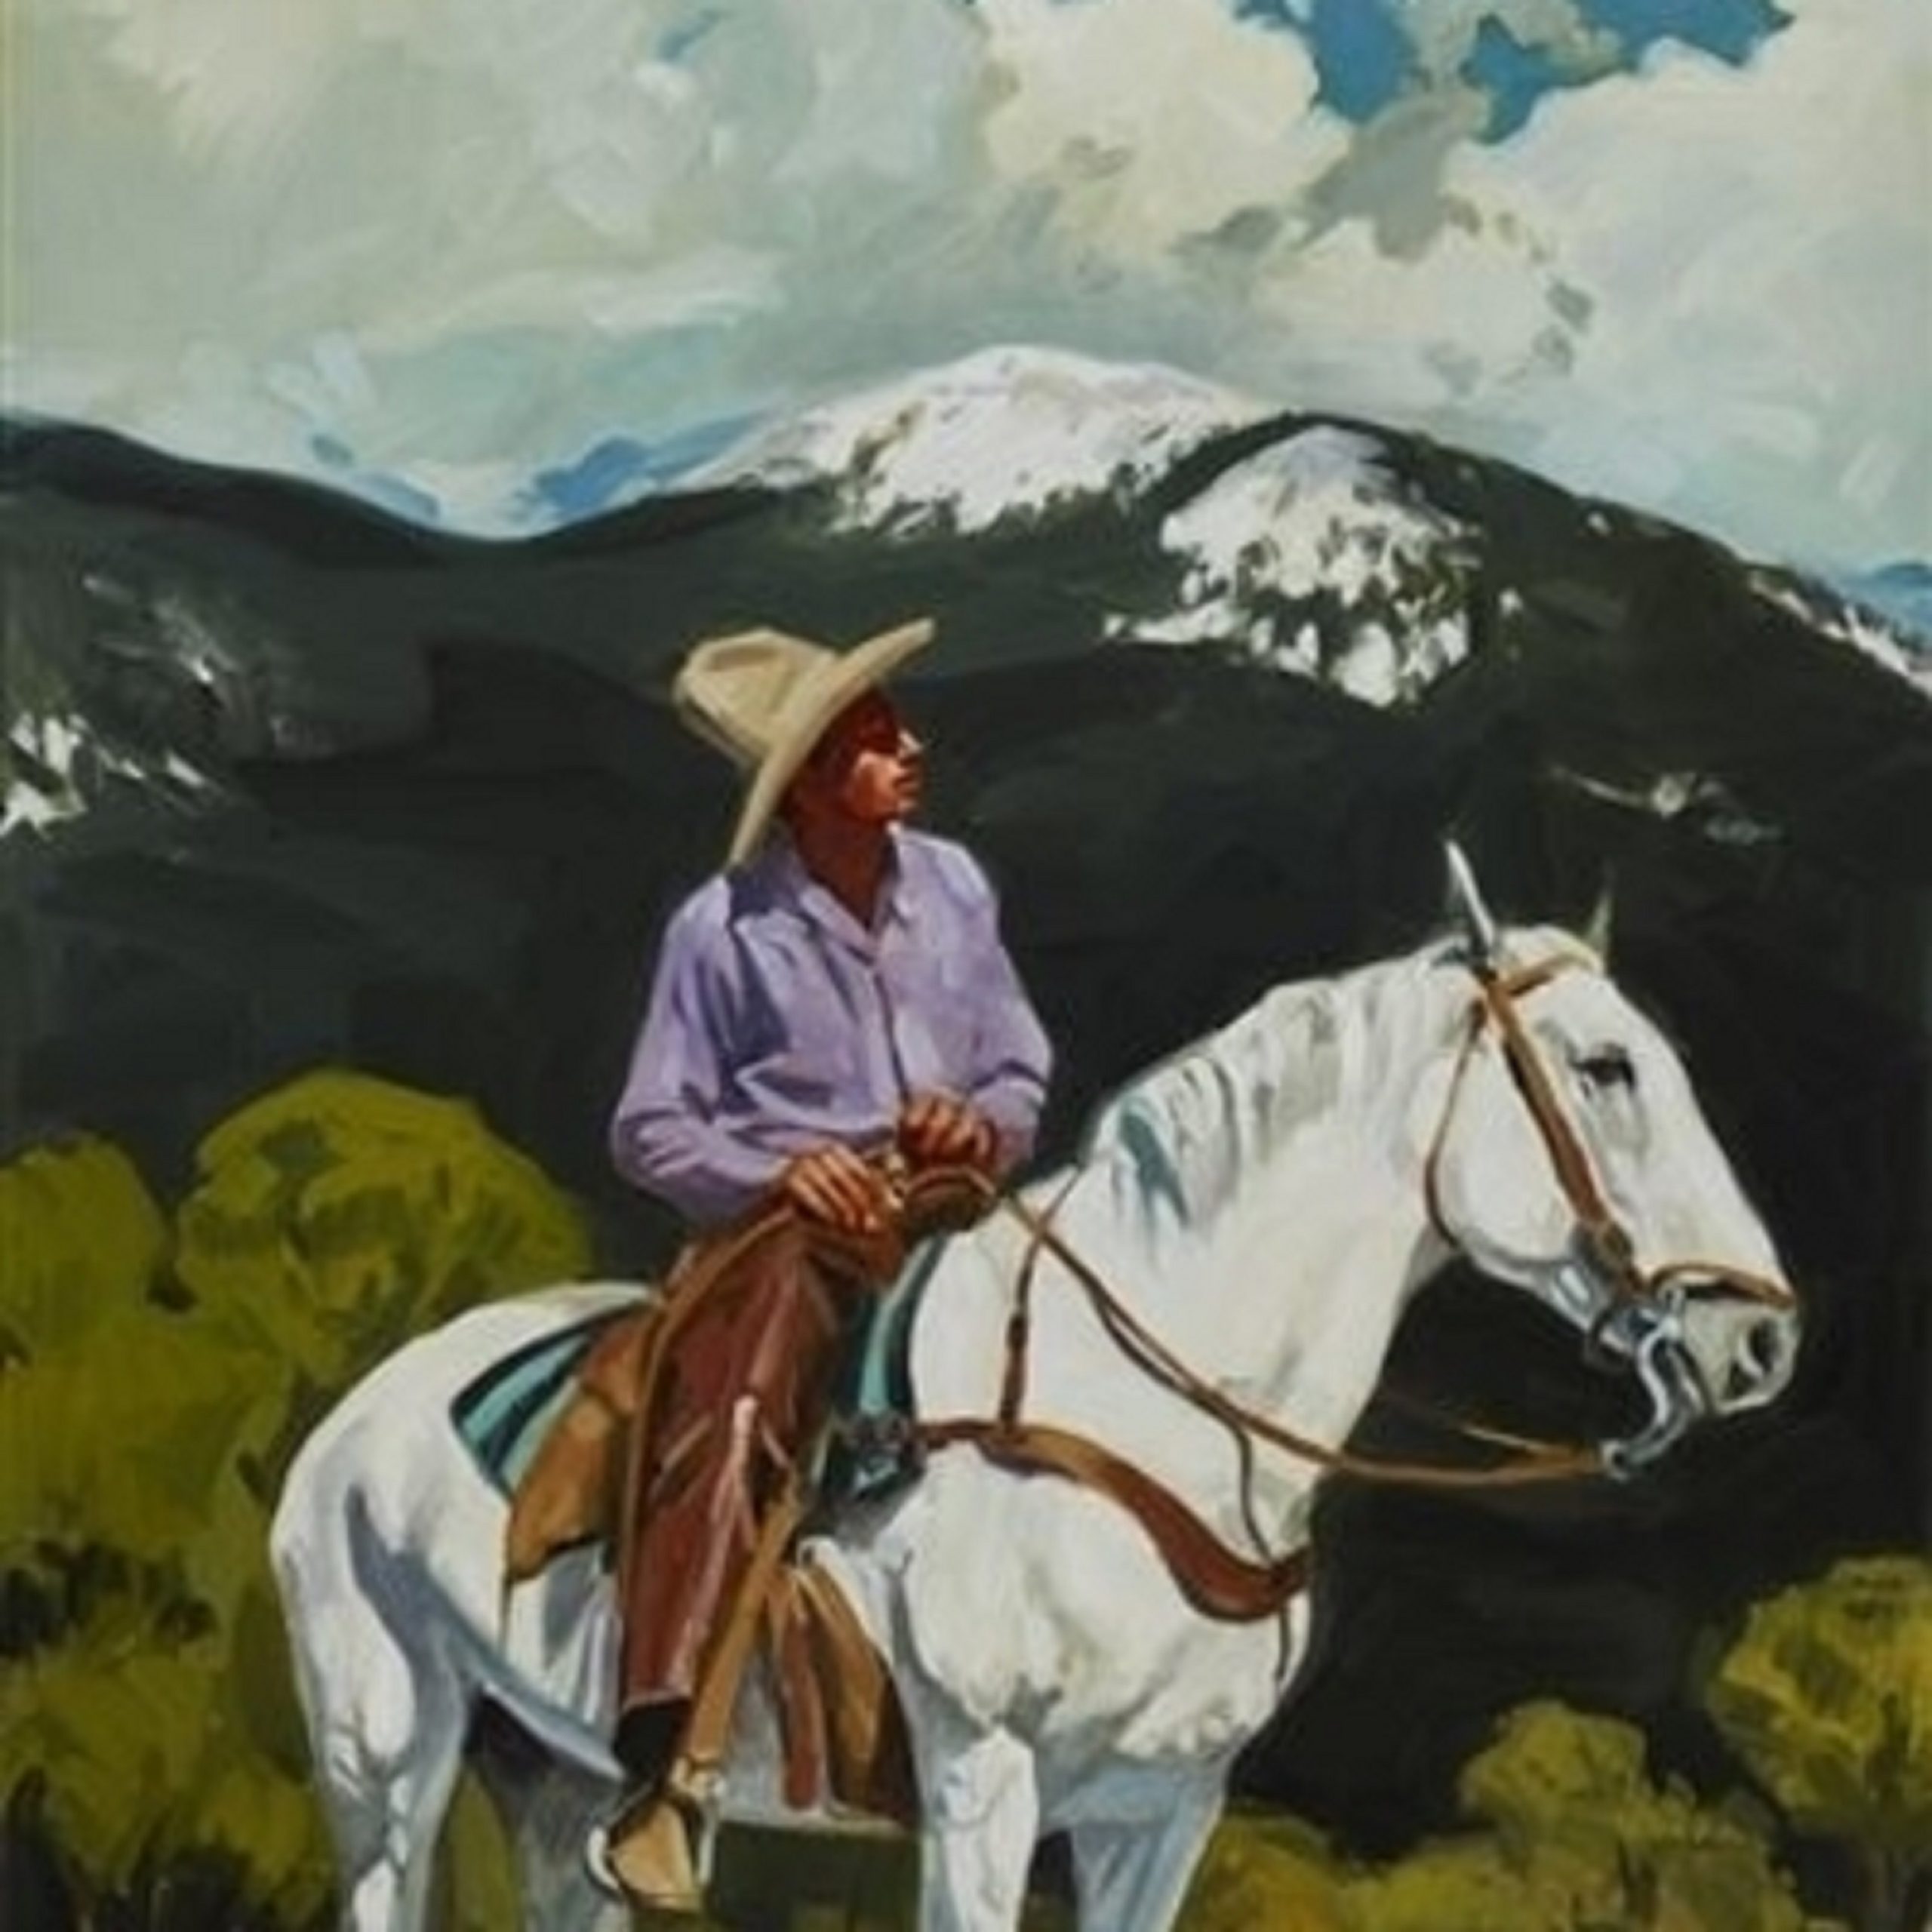 
		                					Michael Cassidy		                																	
																											<i>Below Taos Mountain,</i>  
																																																					oil on linen, 
																																								48 x 27 inches 
																								
		                				